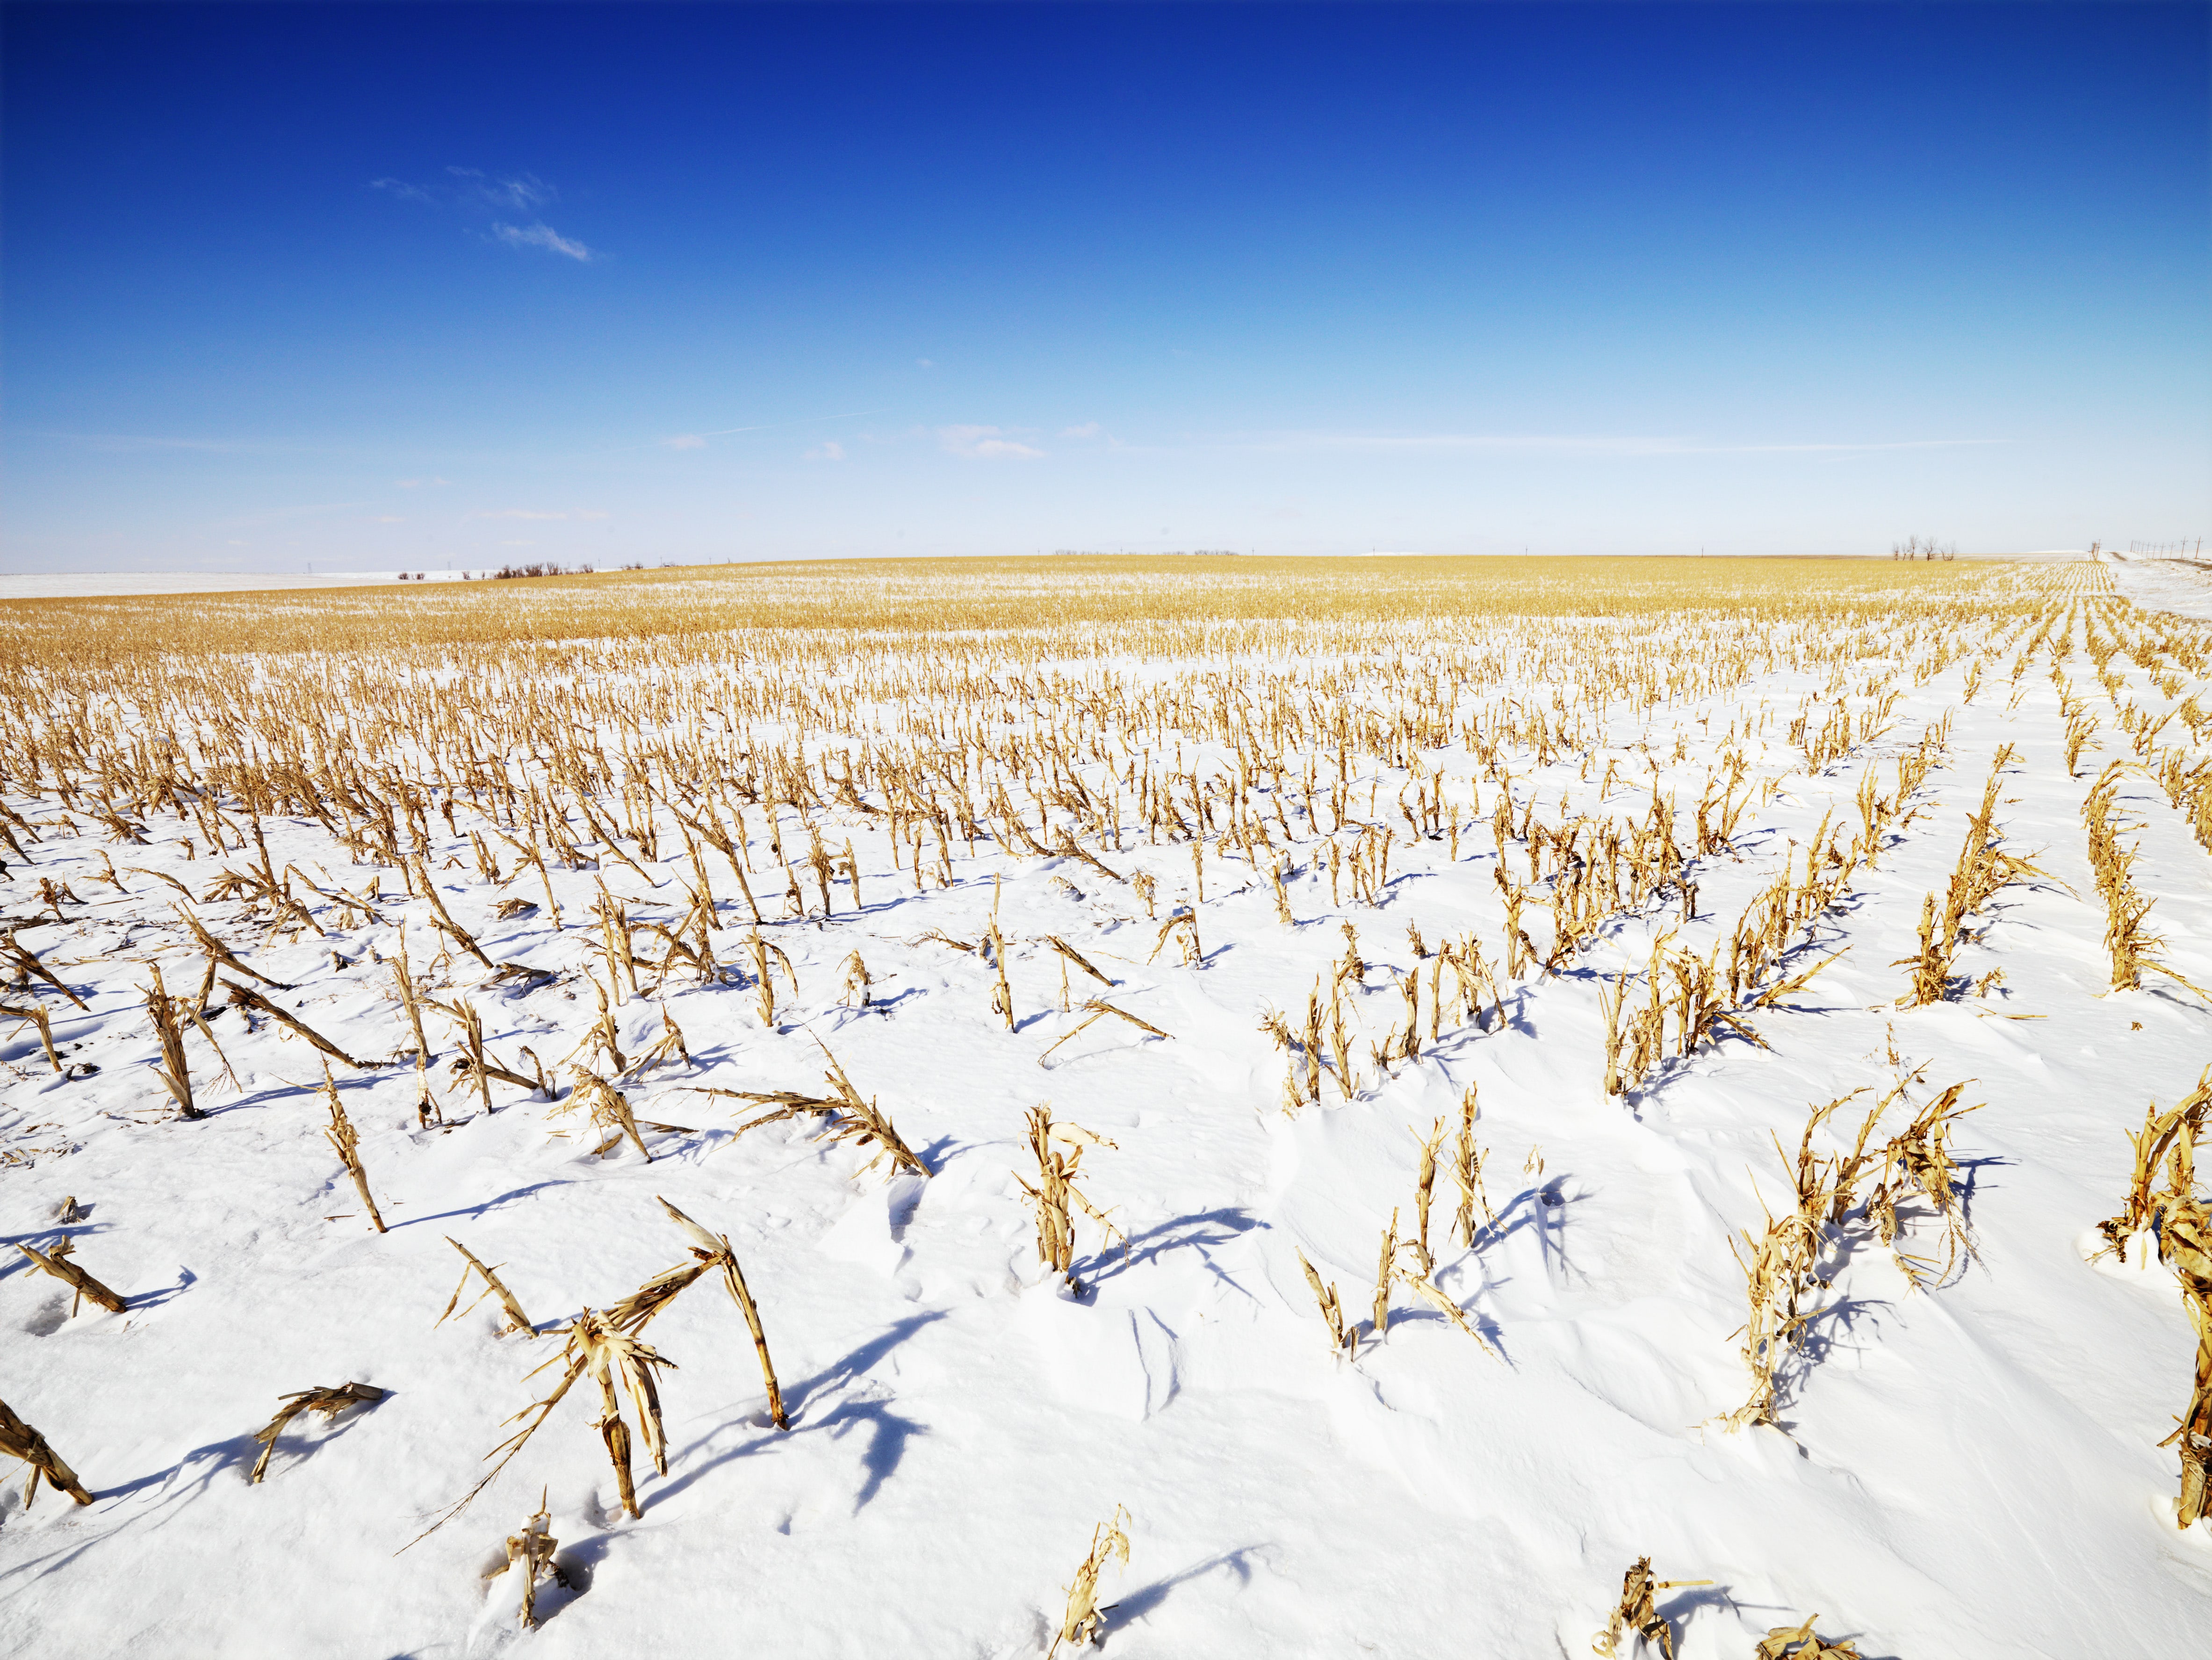 Desolate Snow Covered Corn Field In The Midwestern, USA.